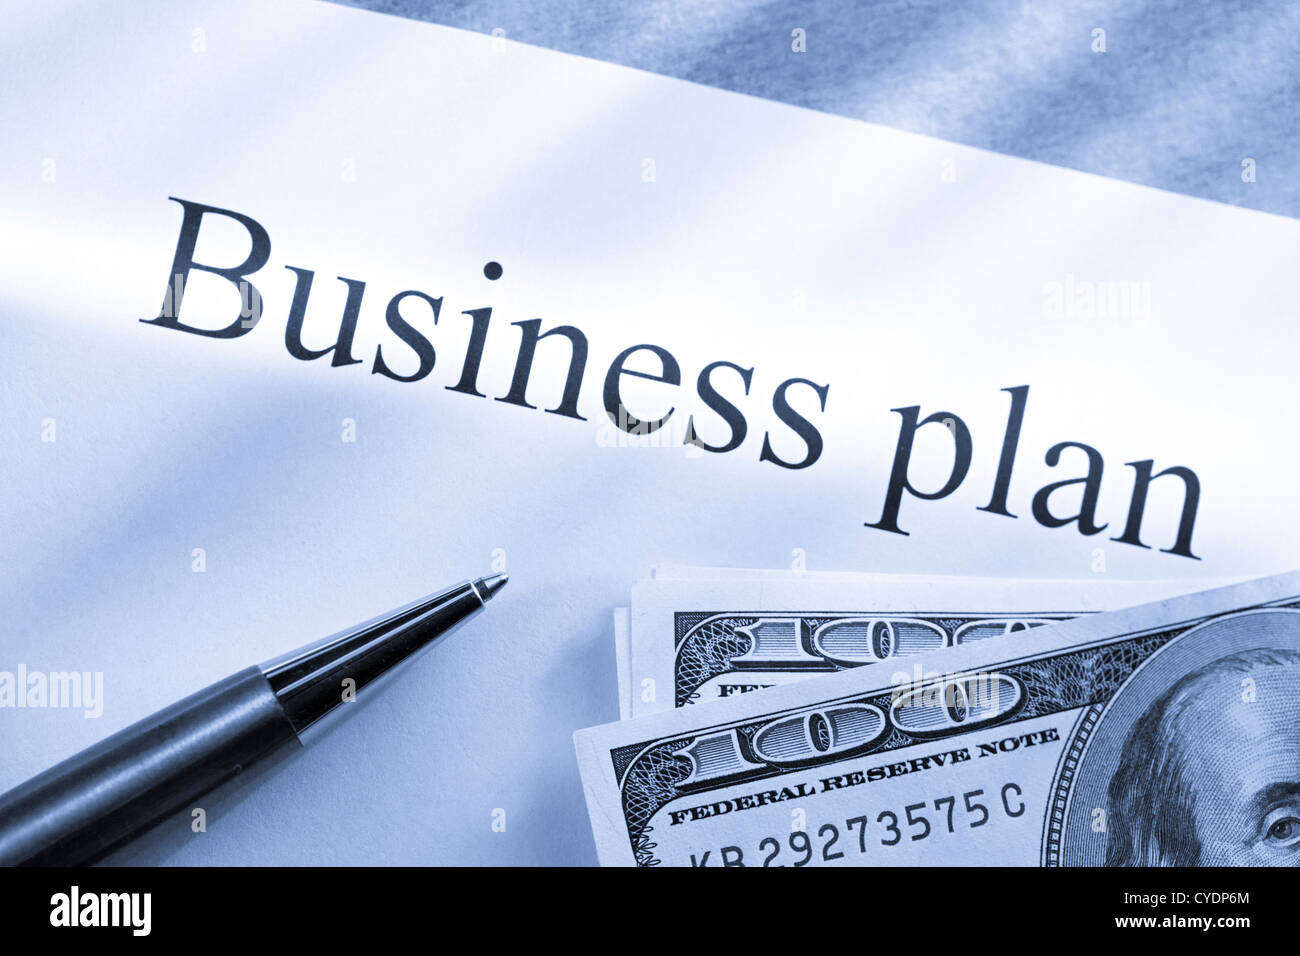 Business plan conception with money Stock Photo